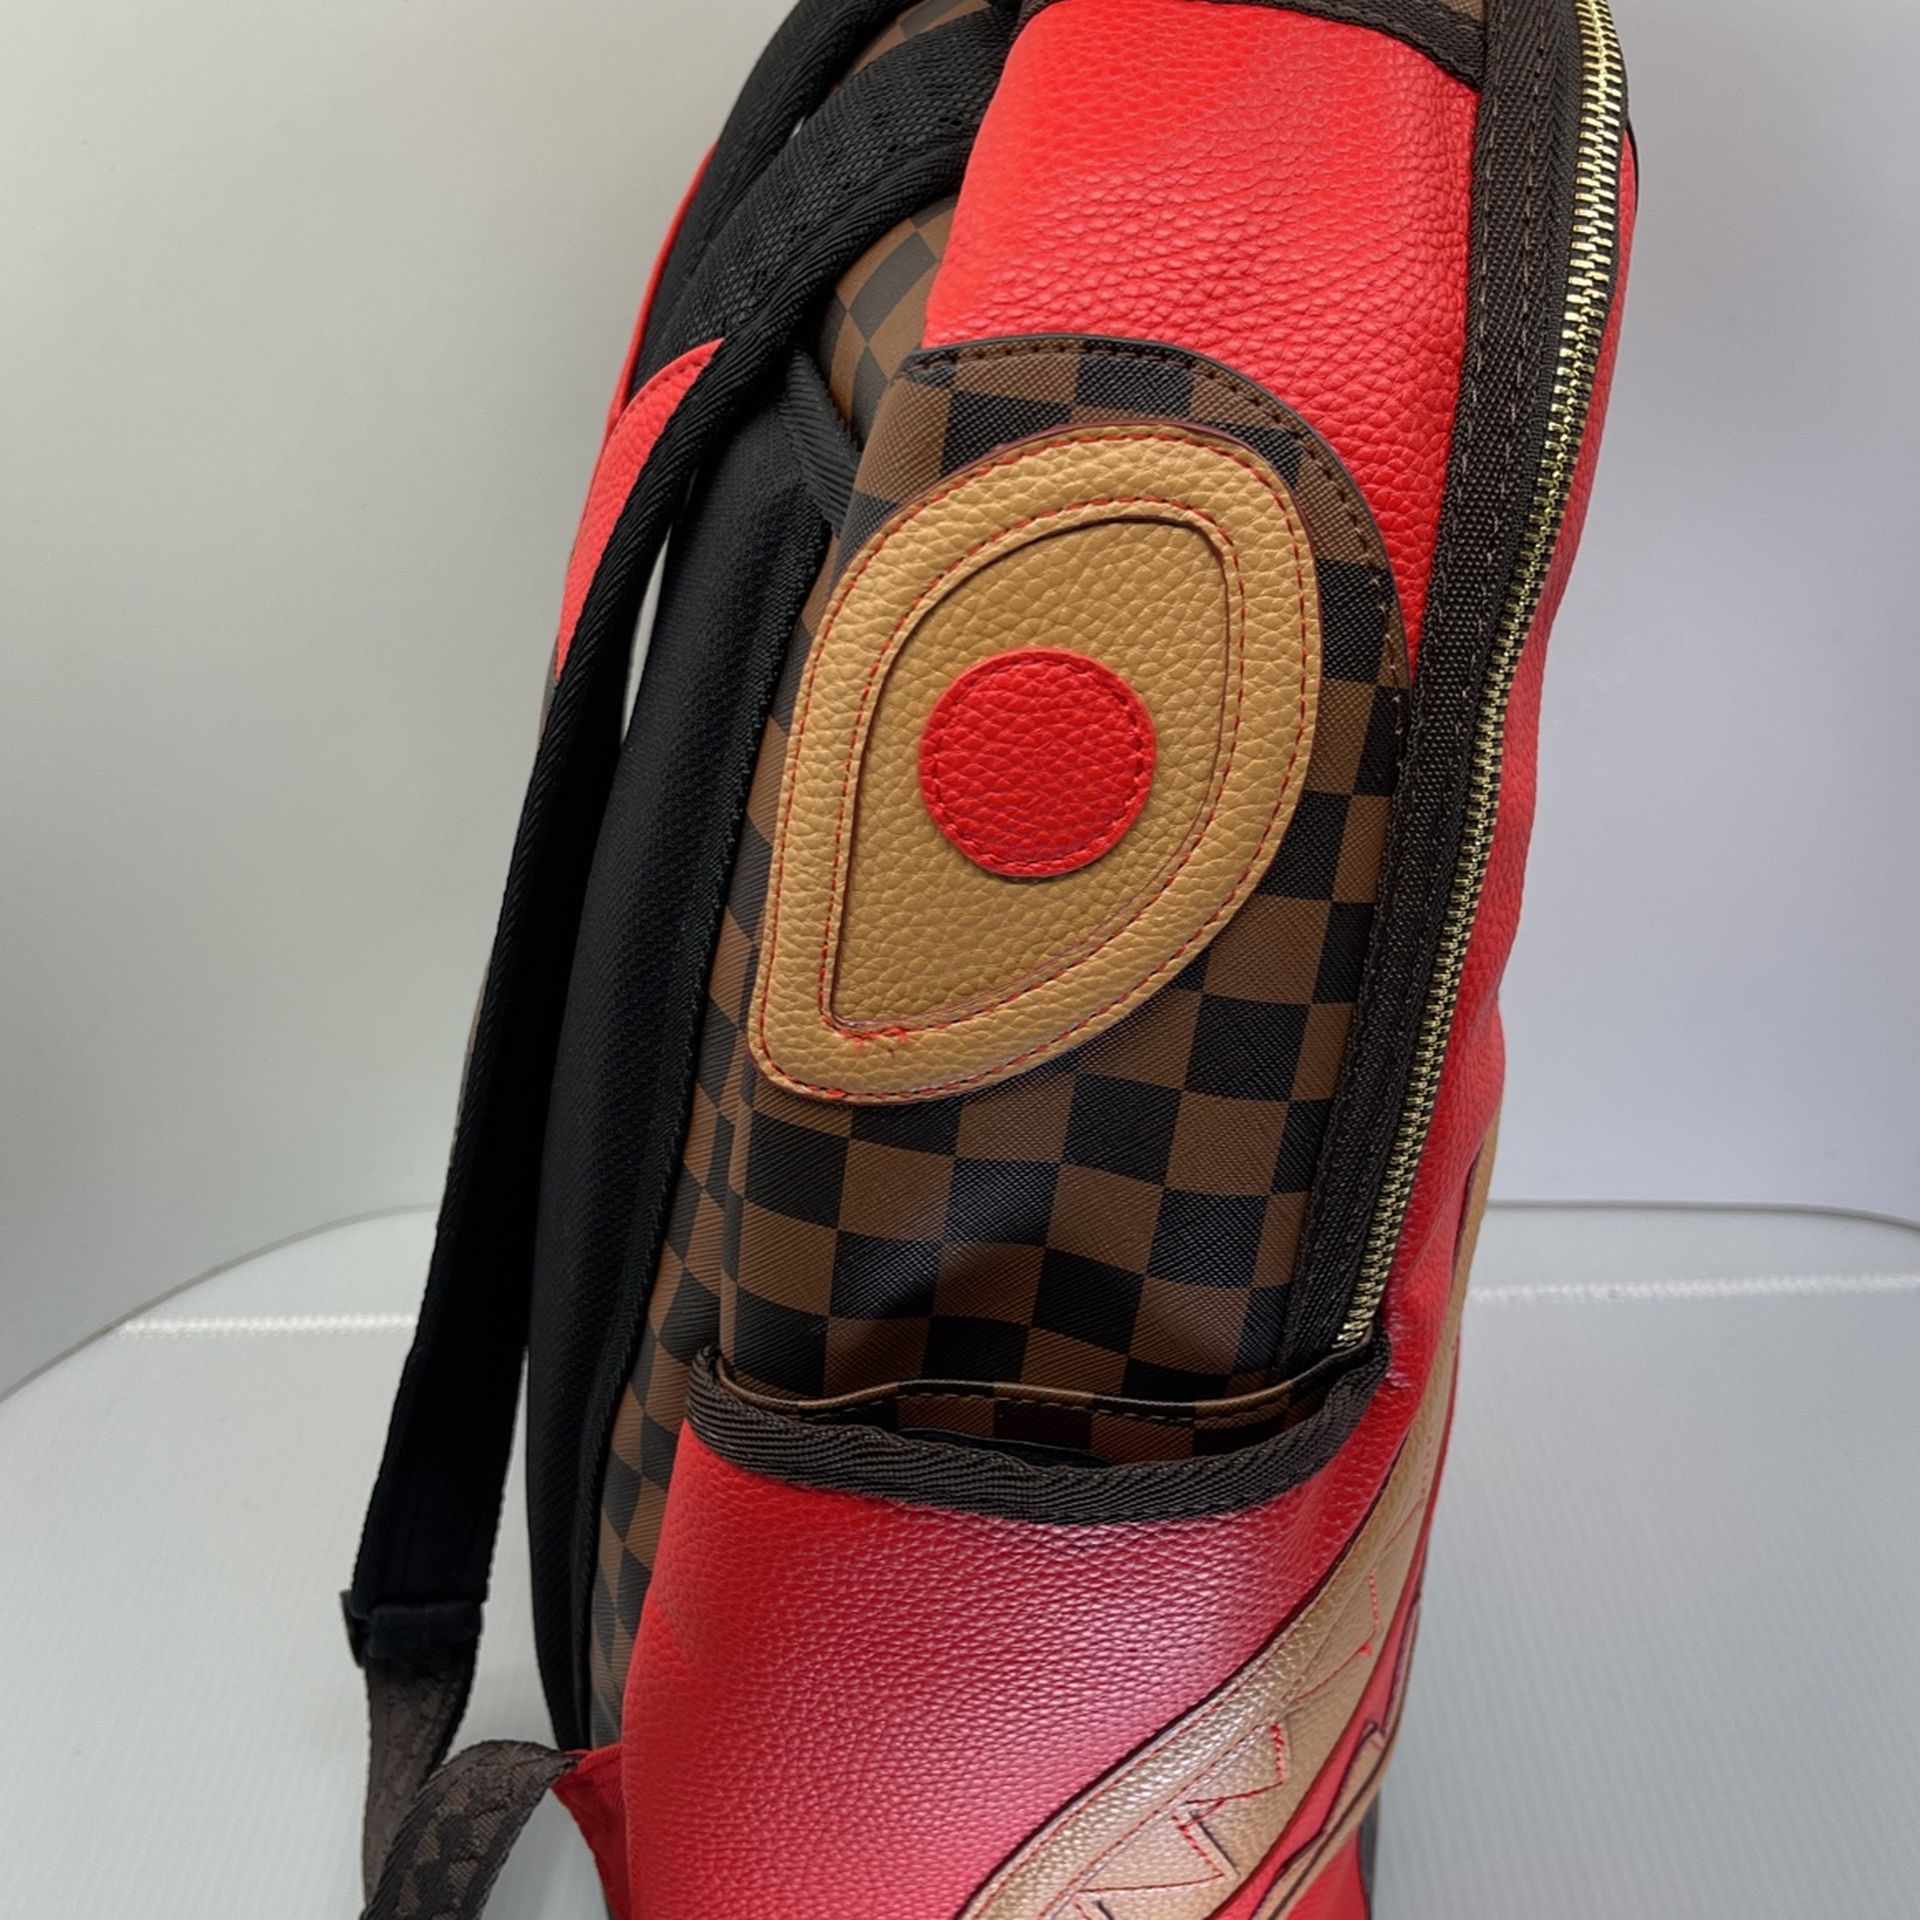 SPRAYGROUND BACKPACK - PINK DRIP BROWN CHECK DLX - BROWN AND PINK - B5077  for Sale in Peachtree Corners, GA - OfferUp